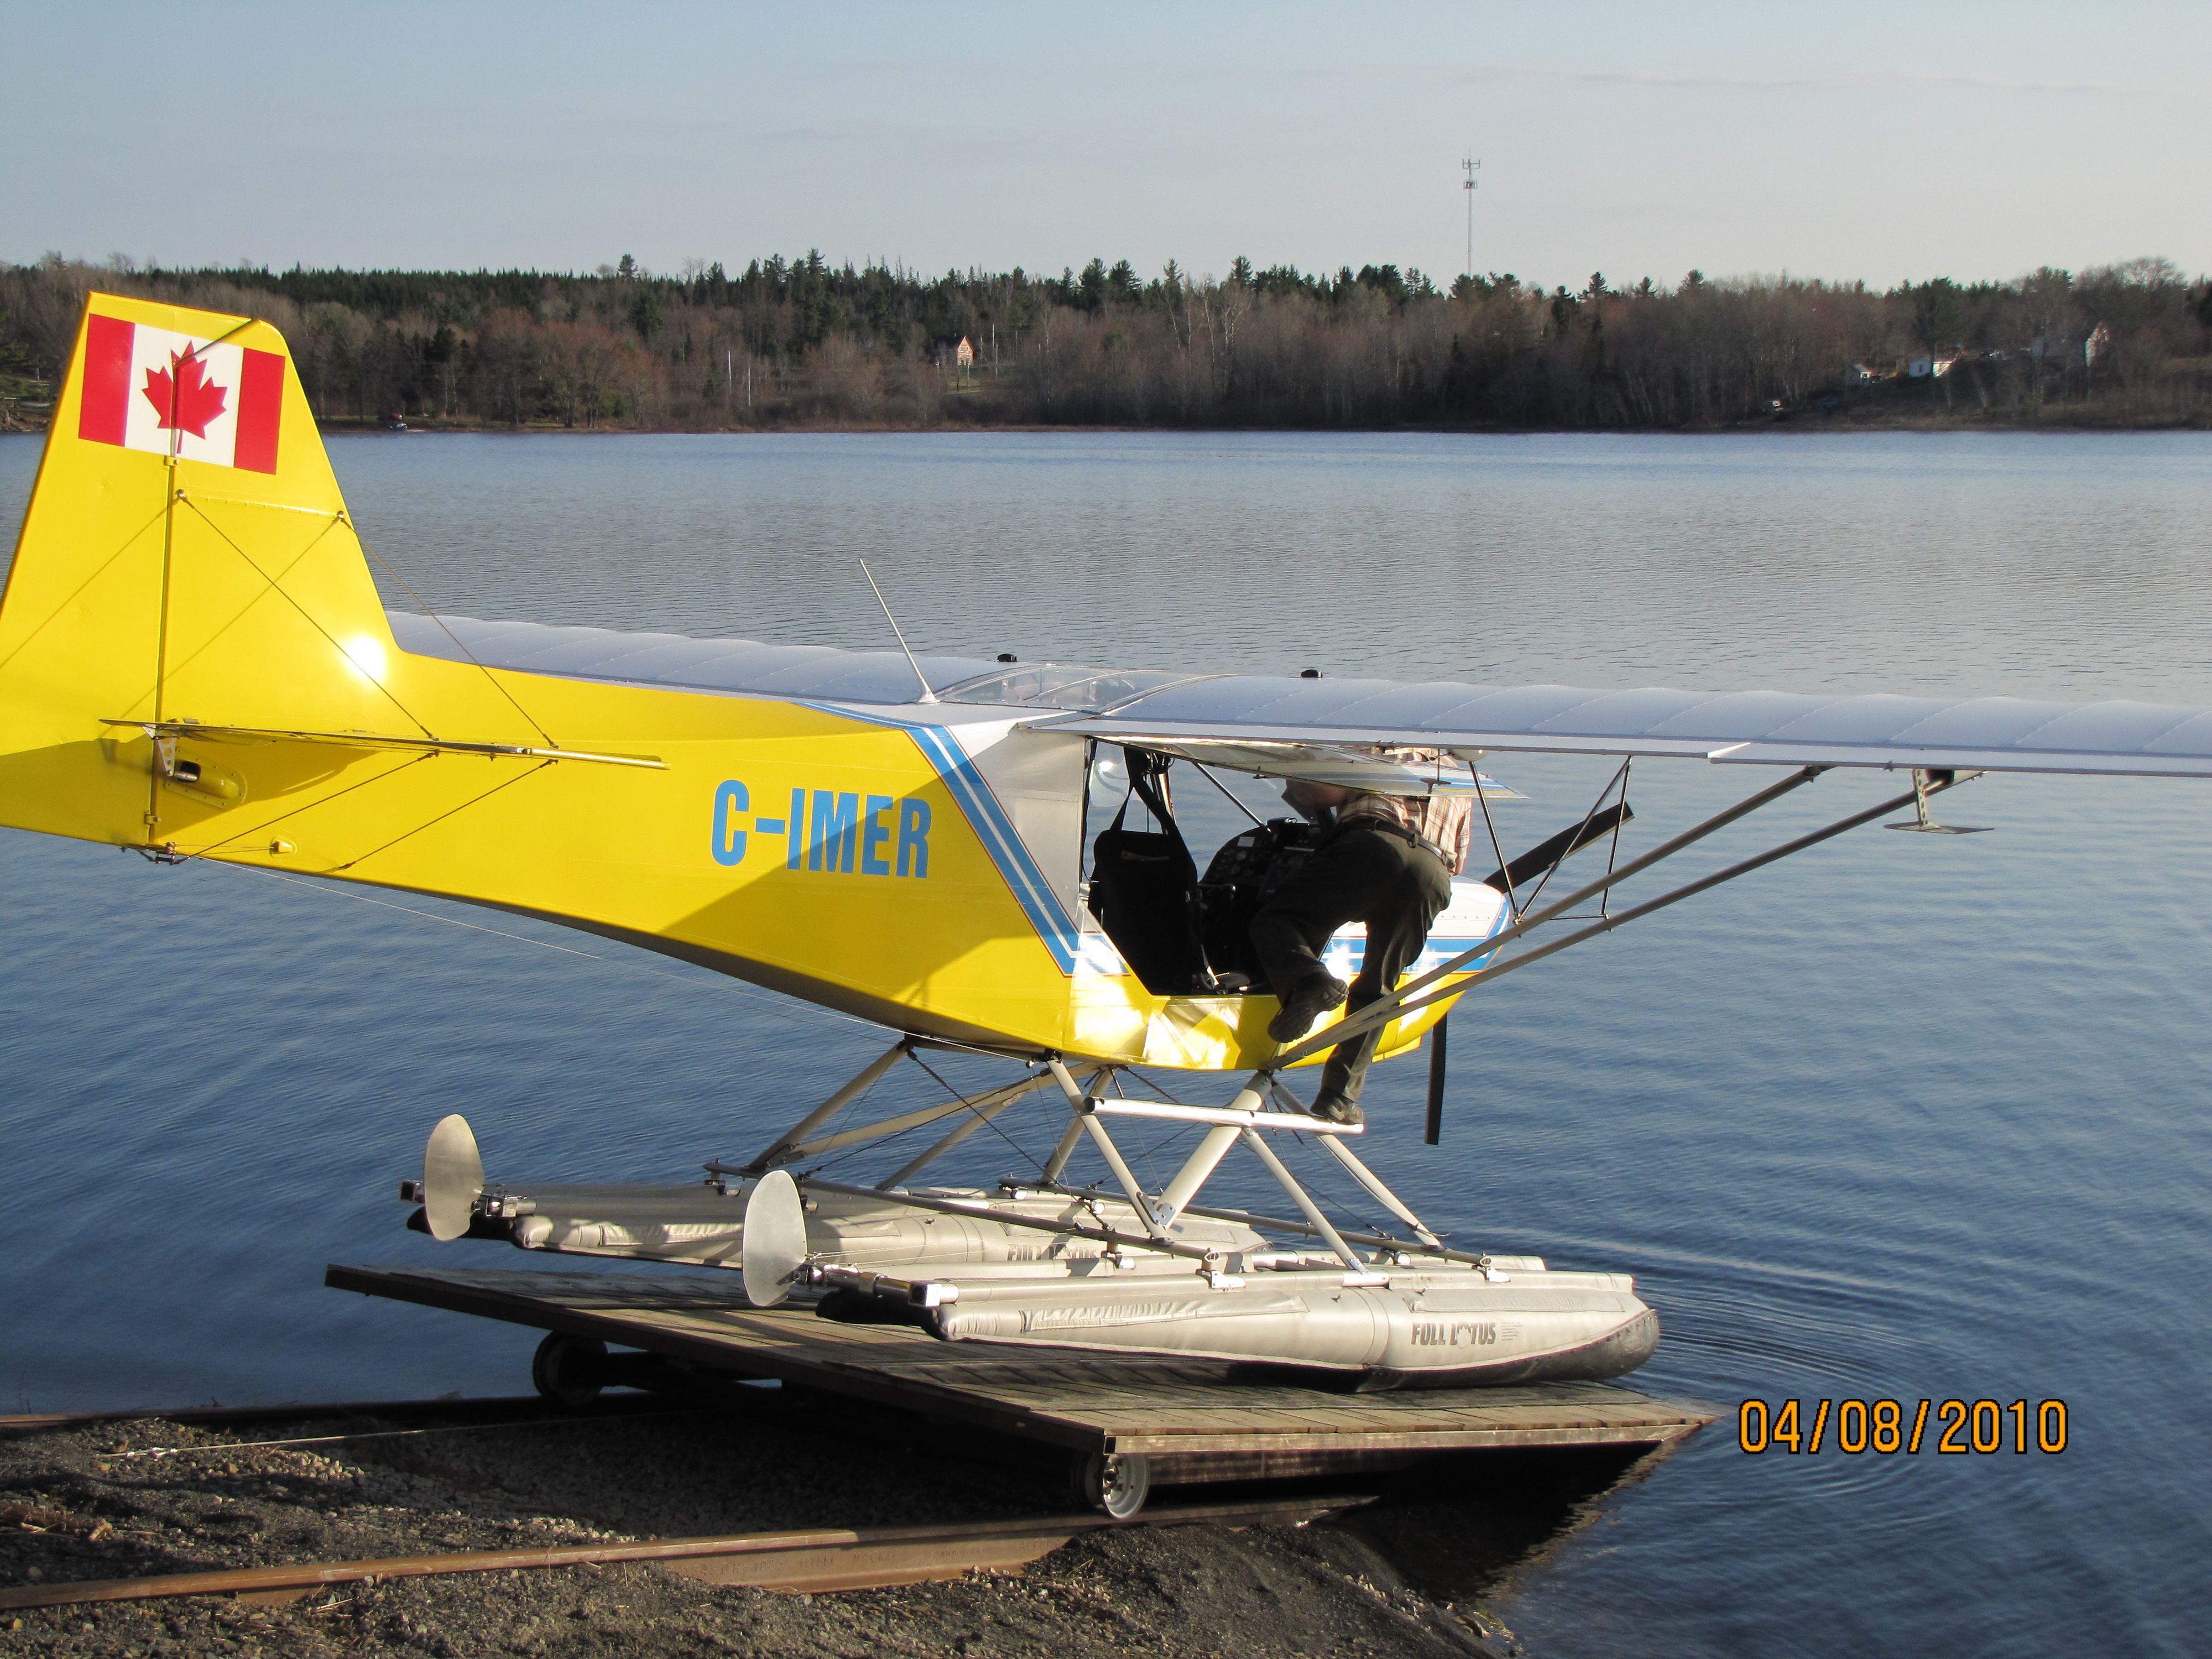 C-IMER — - Pilot boarding the A/C. Lake in New Germany NS..April 8/10